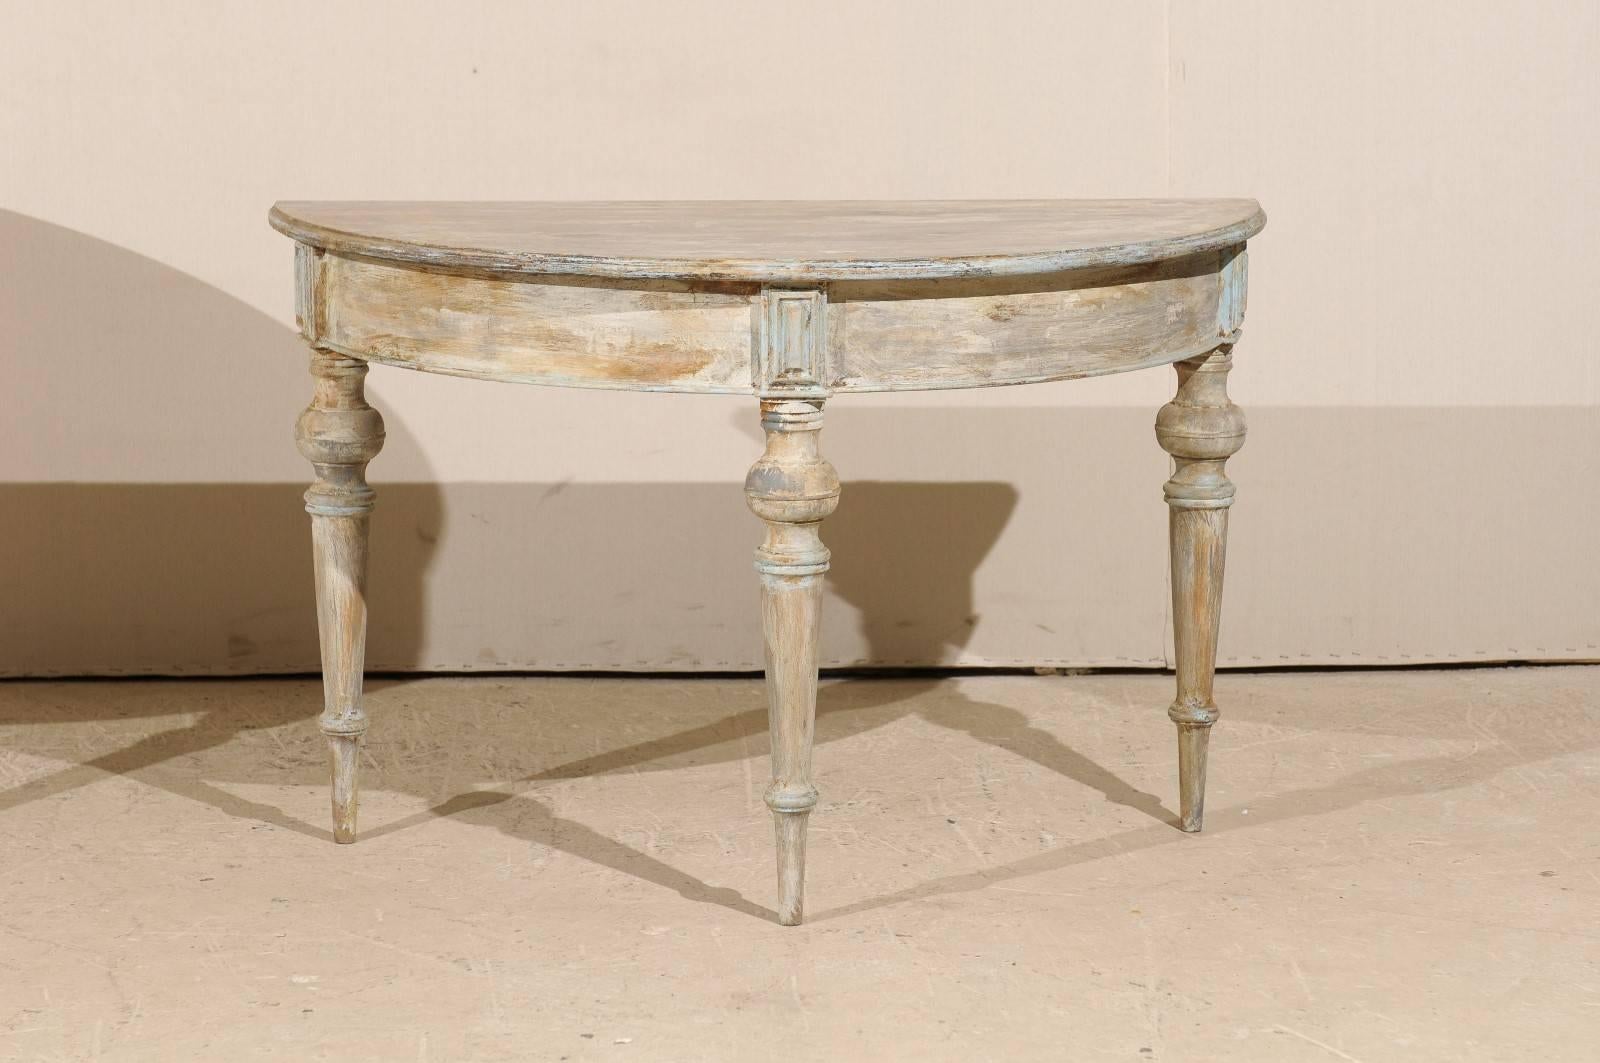 Pair of 19th Century Swedish Demilune Tables in Taupe, Cream & Soft Blue Colors 4